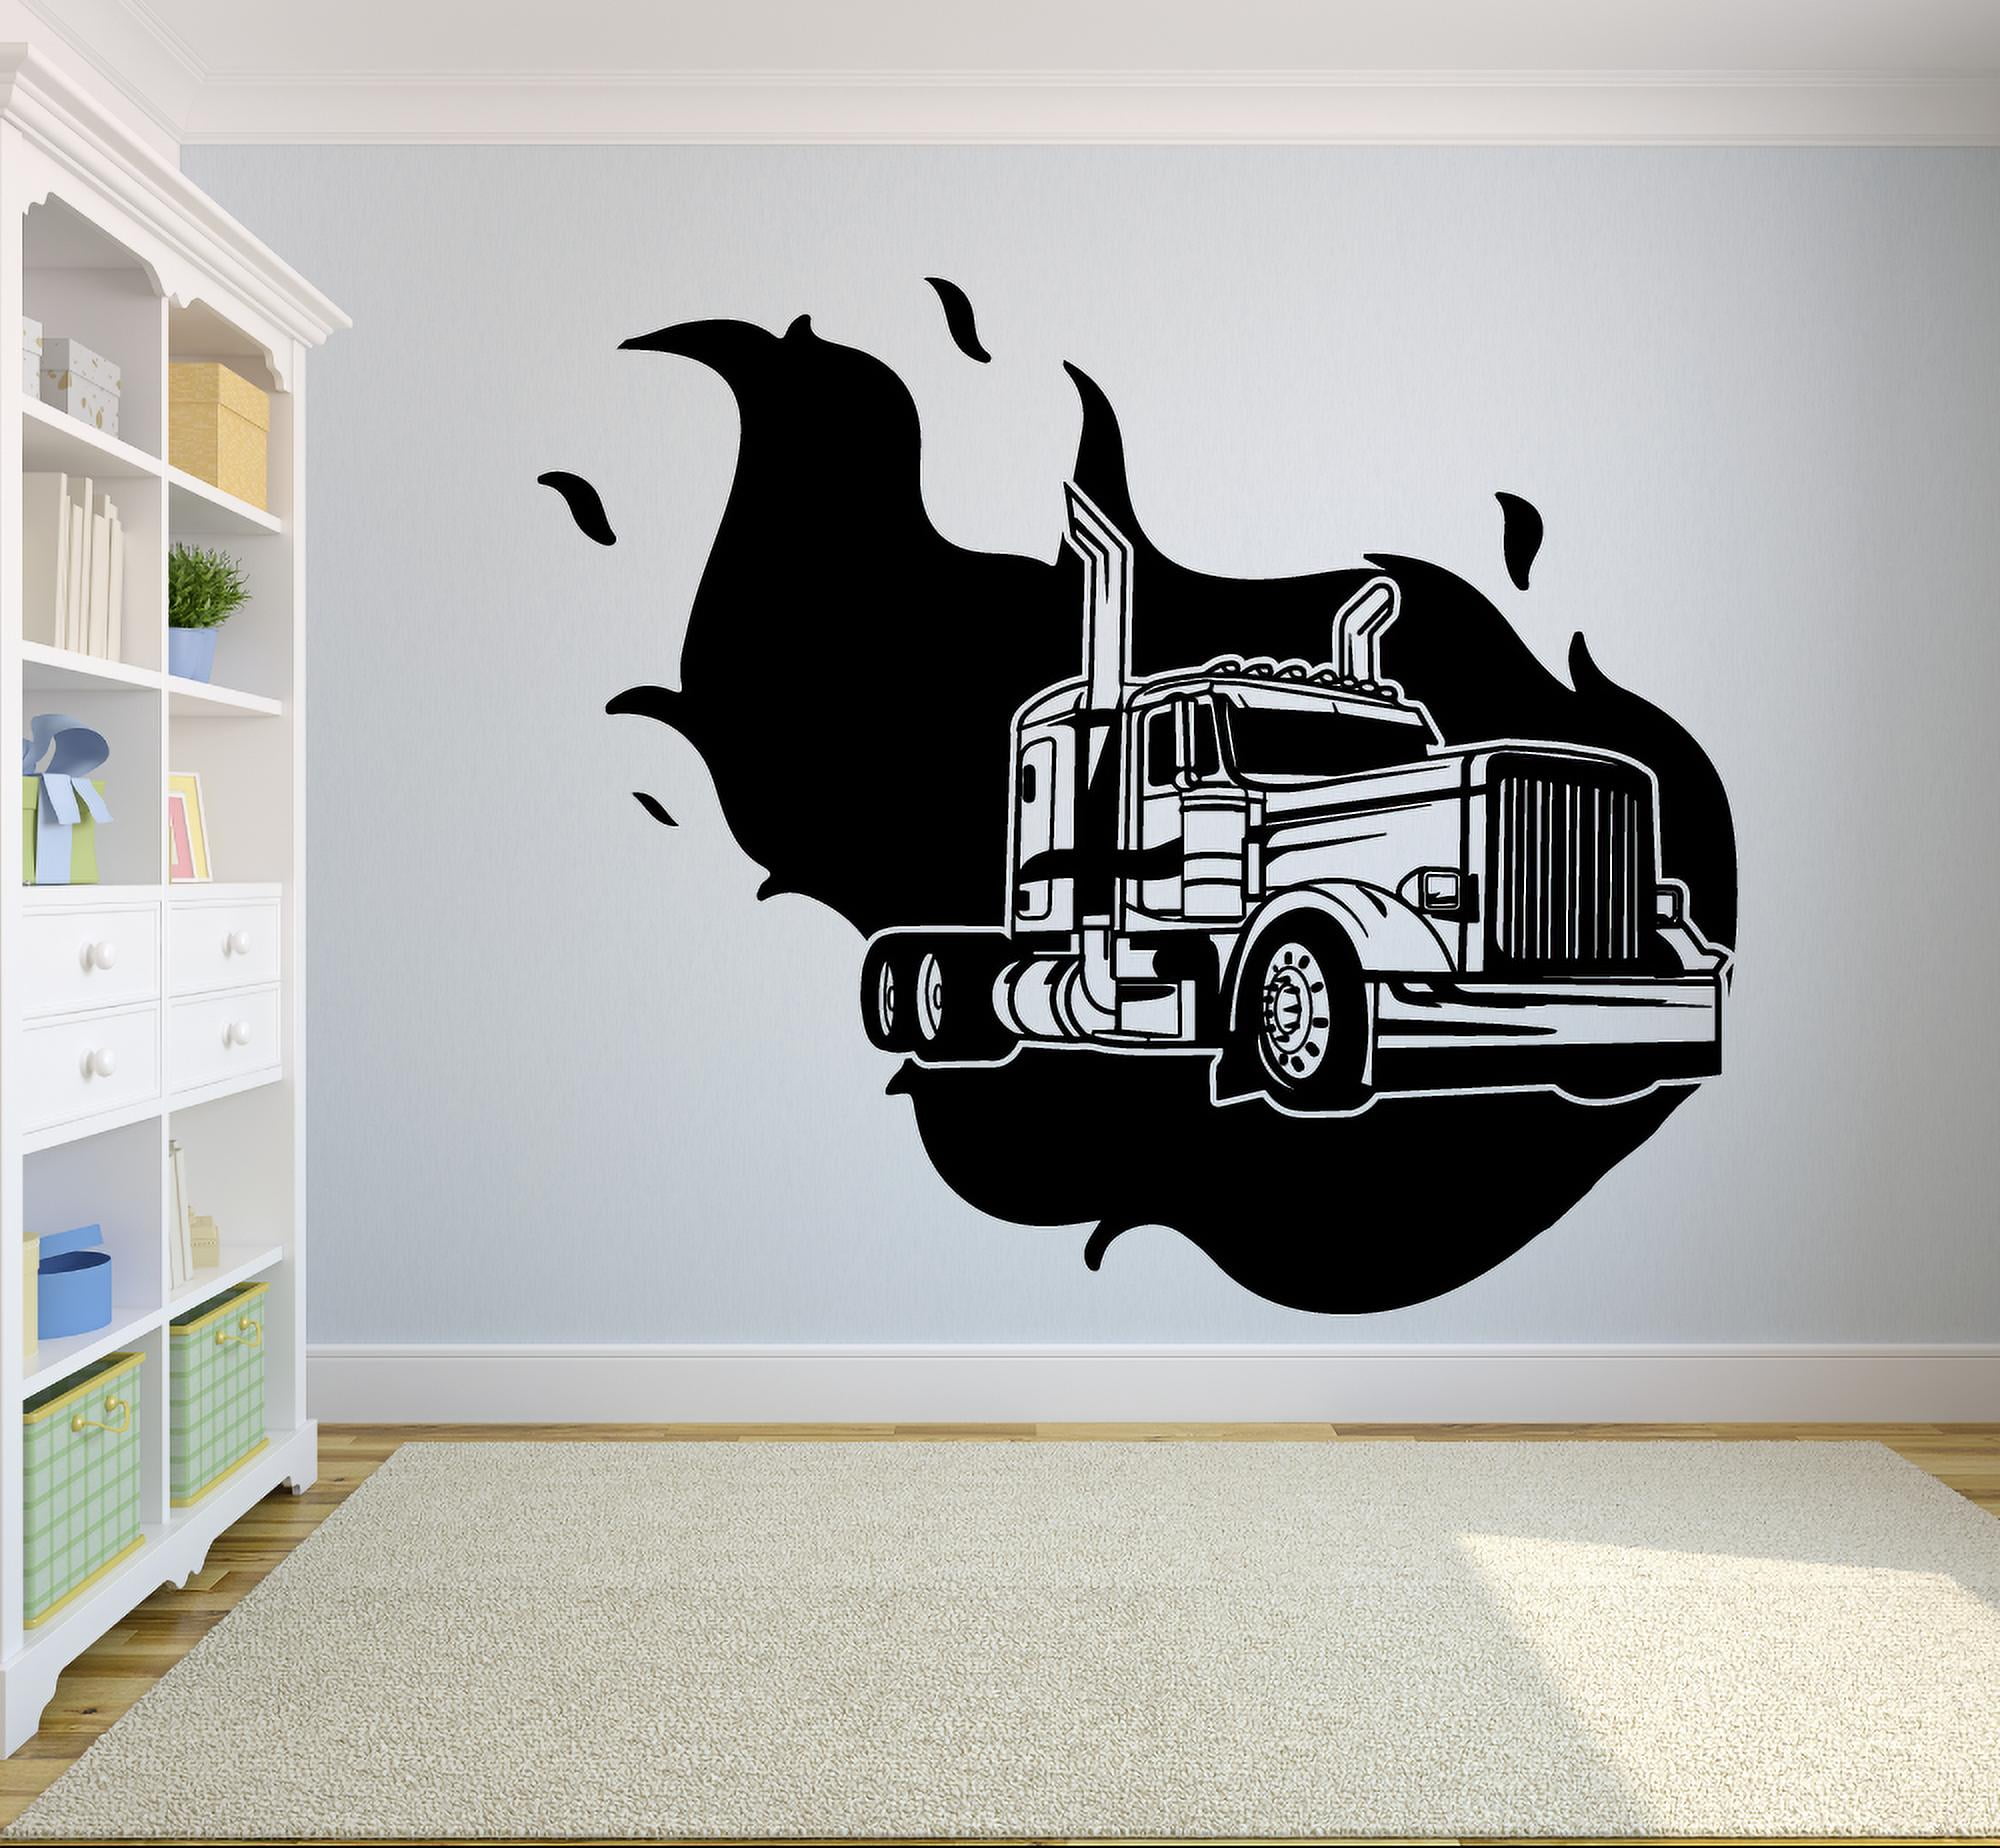 Details about   Baby Name Decal Vinyl Toddler Boy Nursery Teen Wall Decor Bedroom Playroom Room 